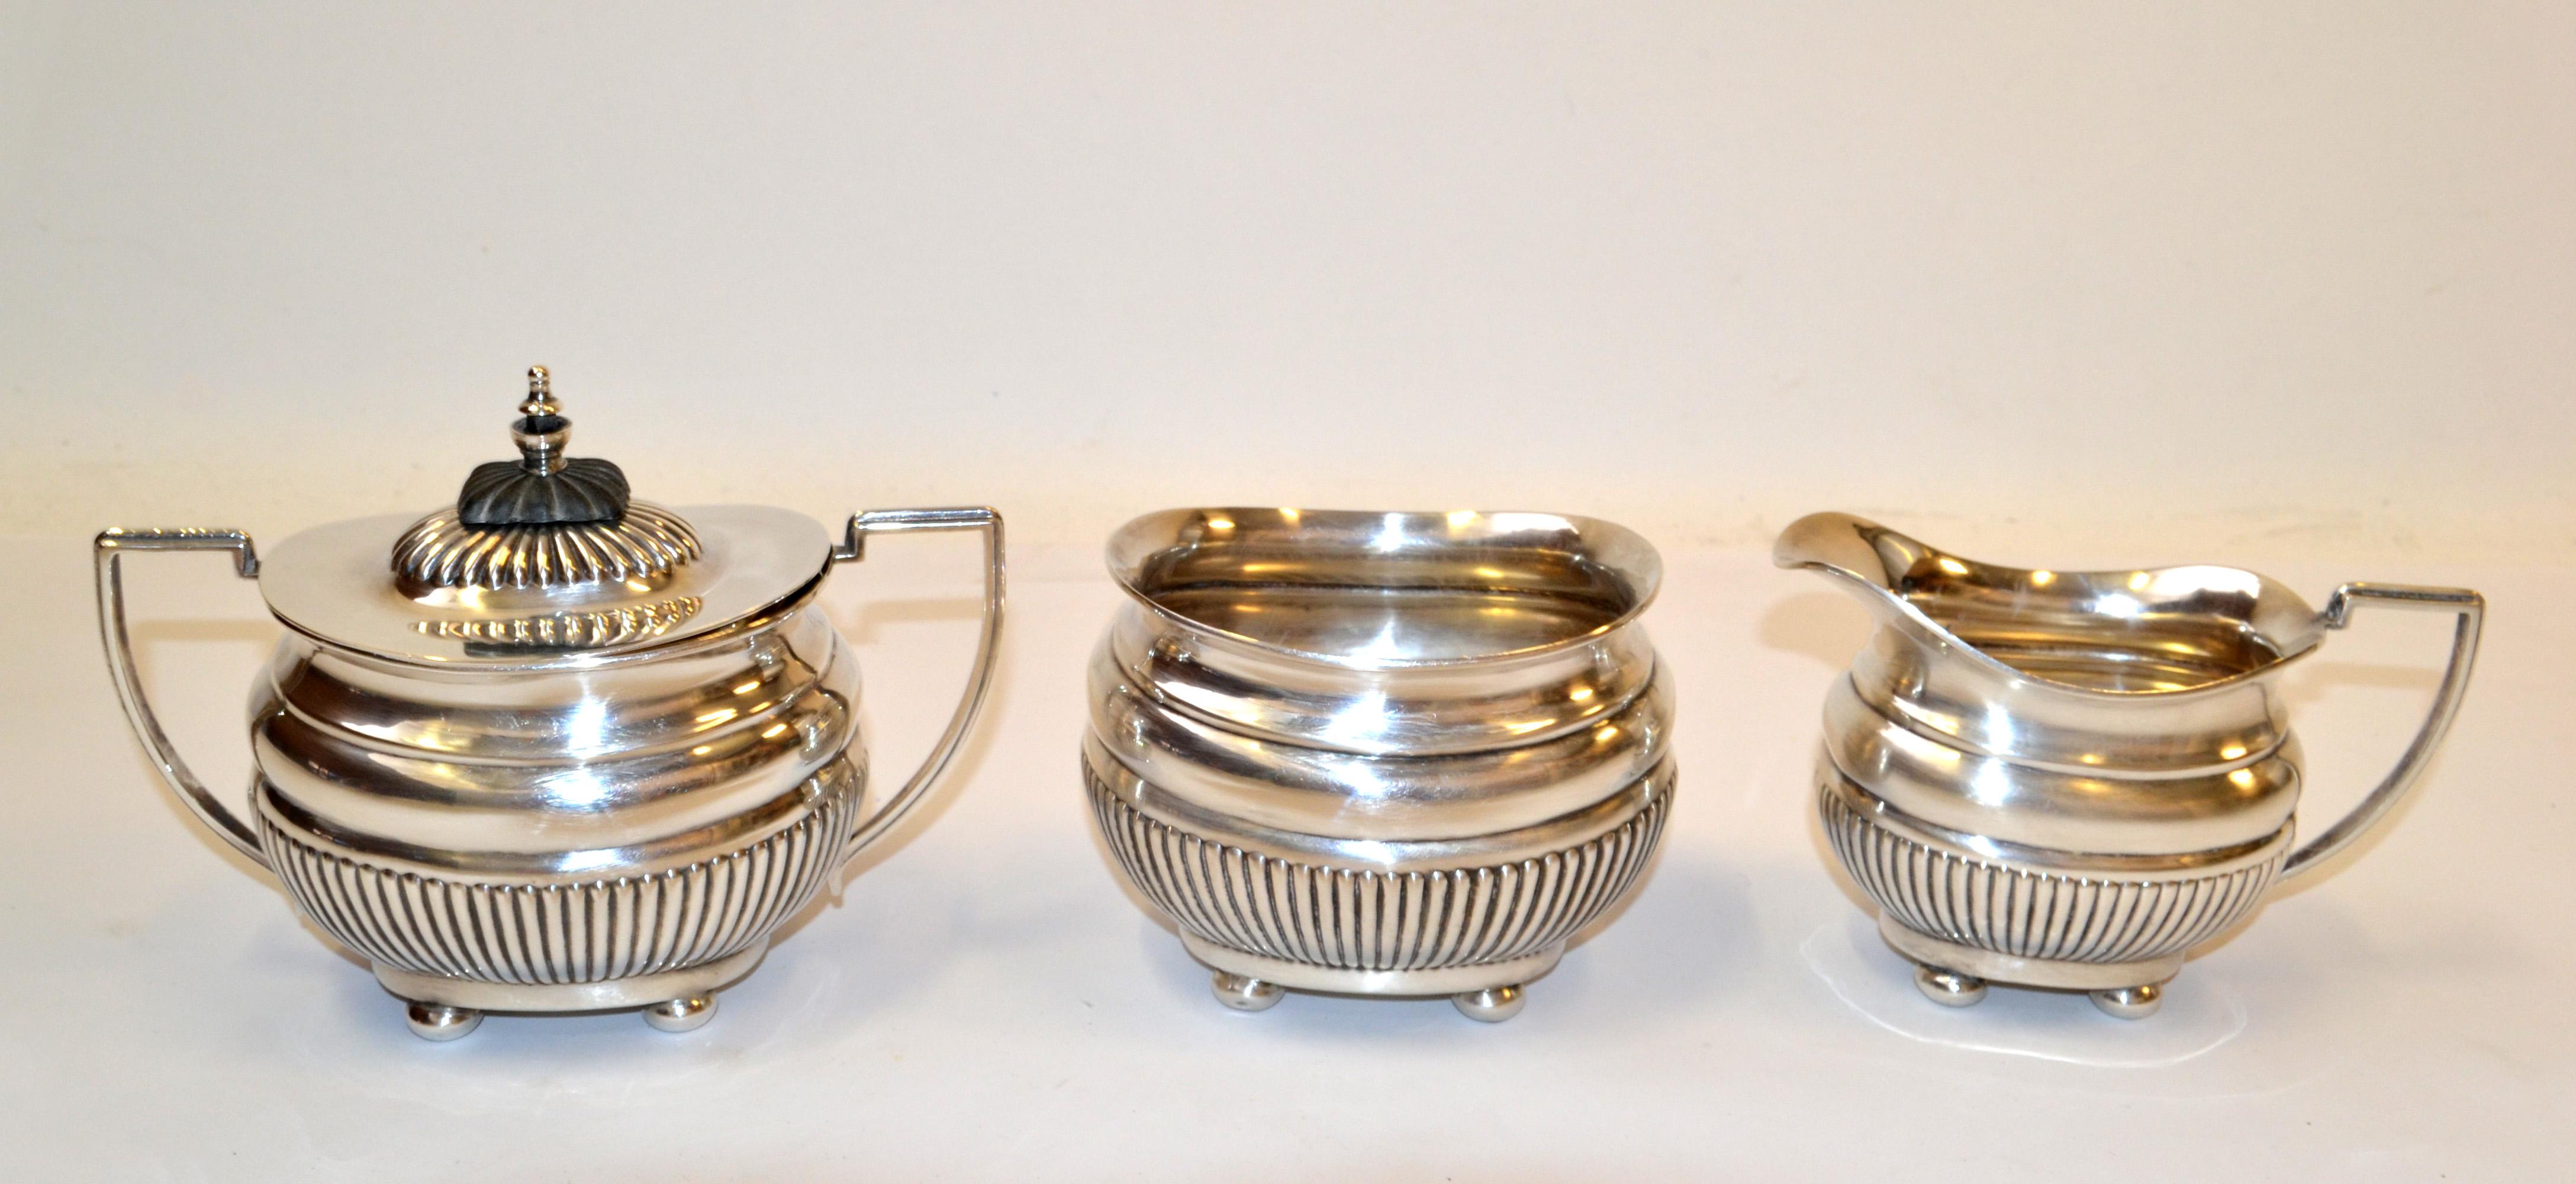 British Colonial Antique 1910 Cheltenham Silver Coffee Service Sheffield England For Sale 8